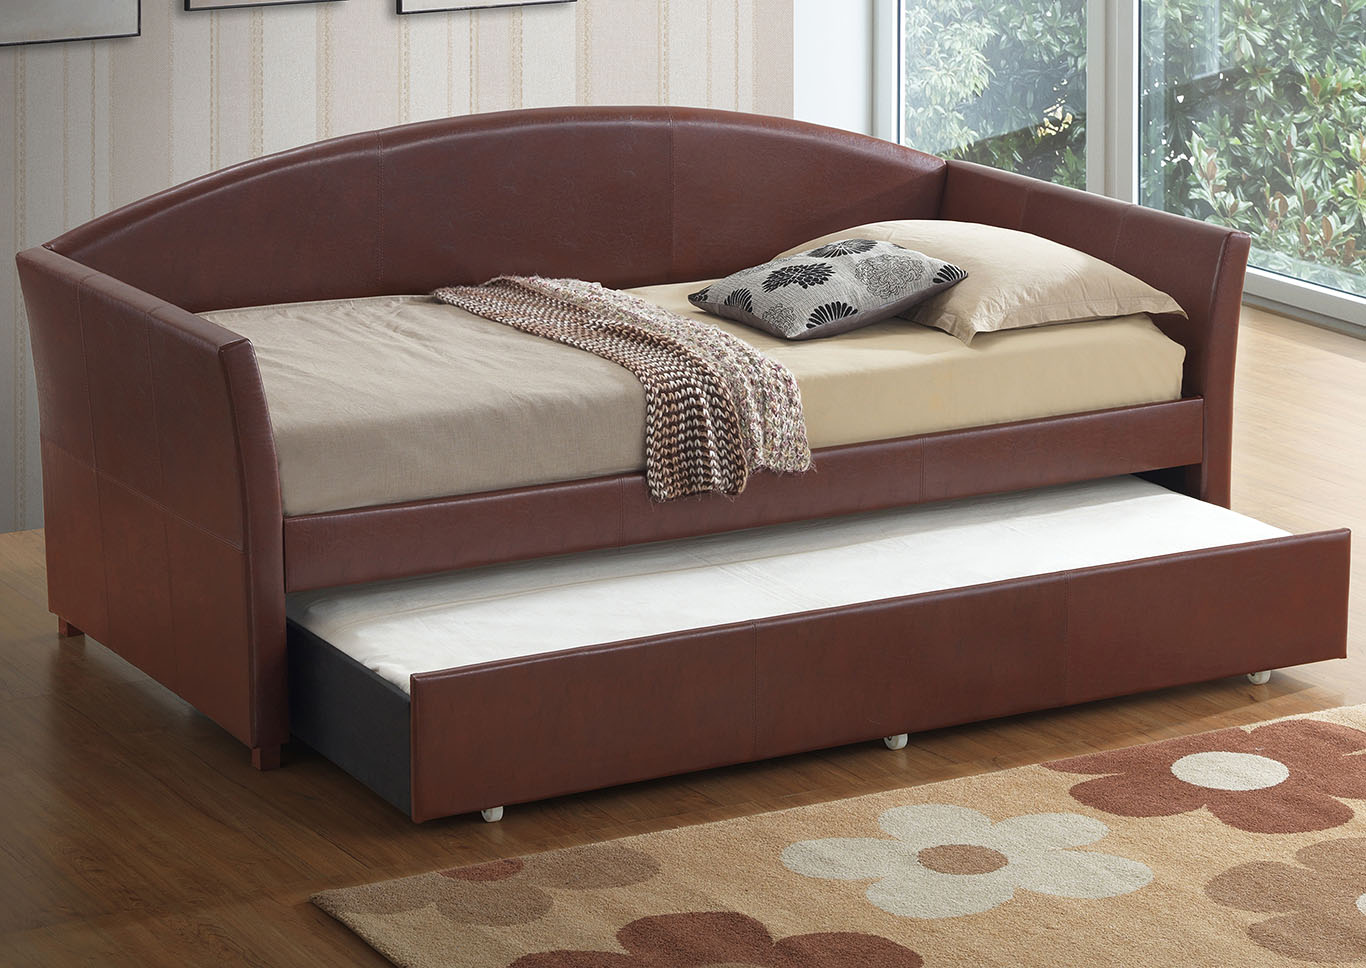 Brown Day Bed,Glory Furniture